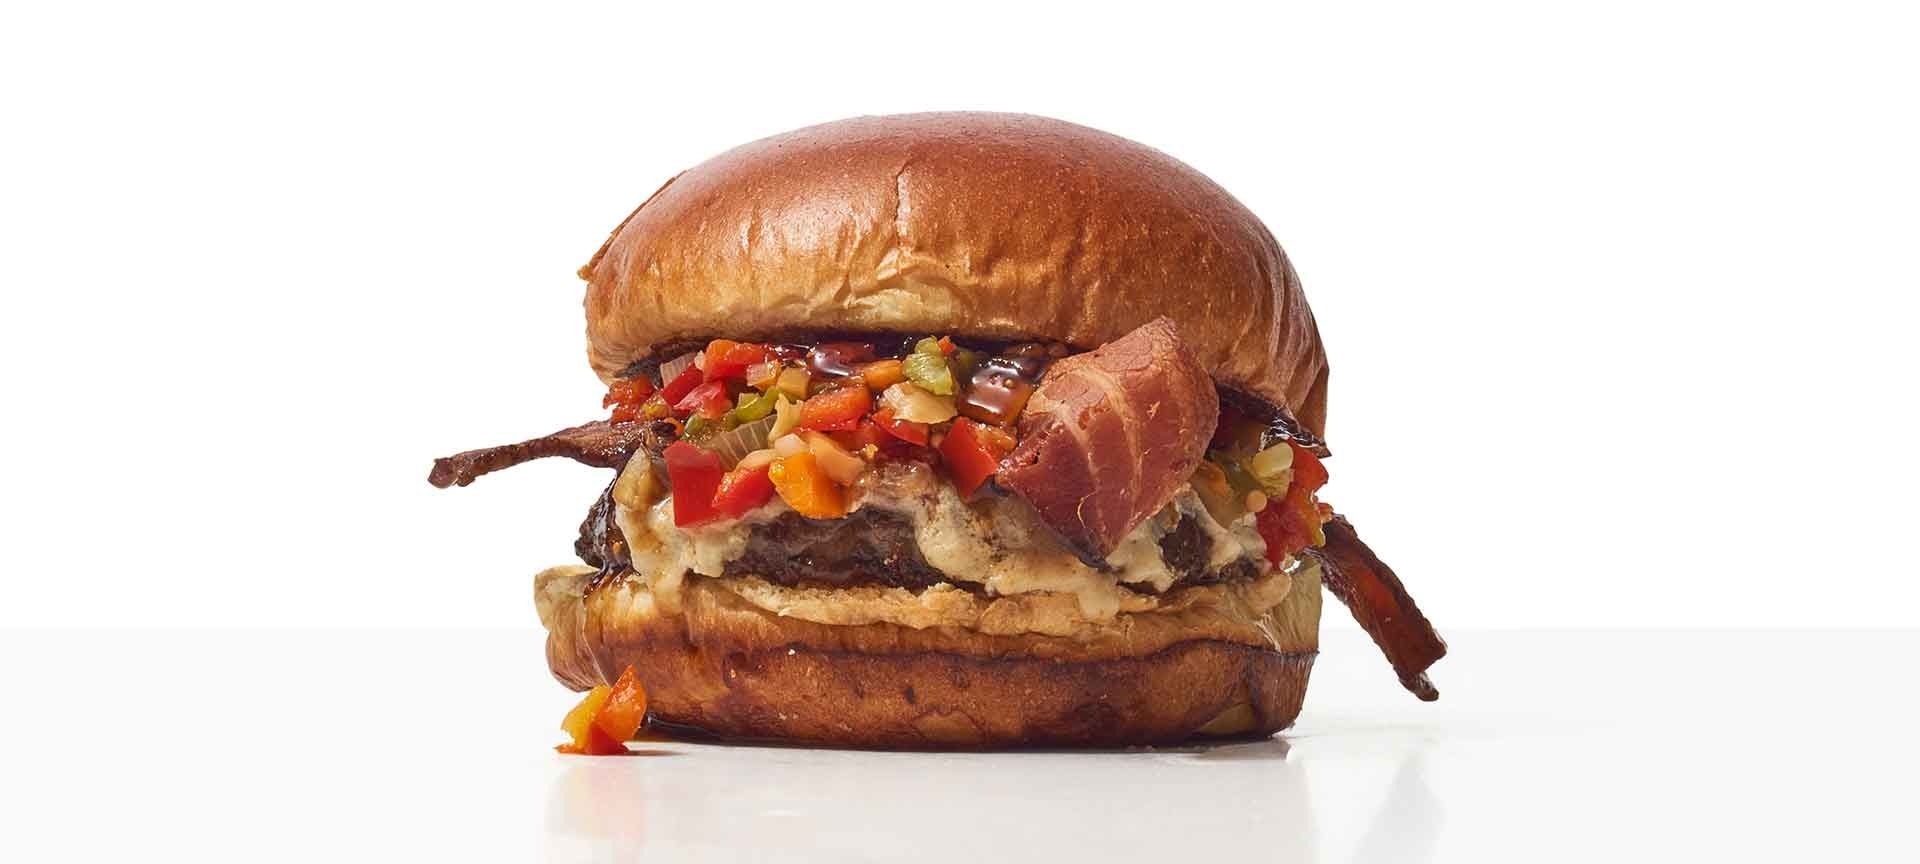 A Hamburger With Meat And Vegetables